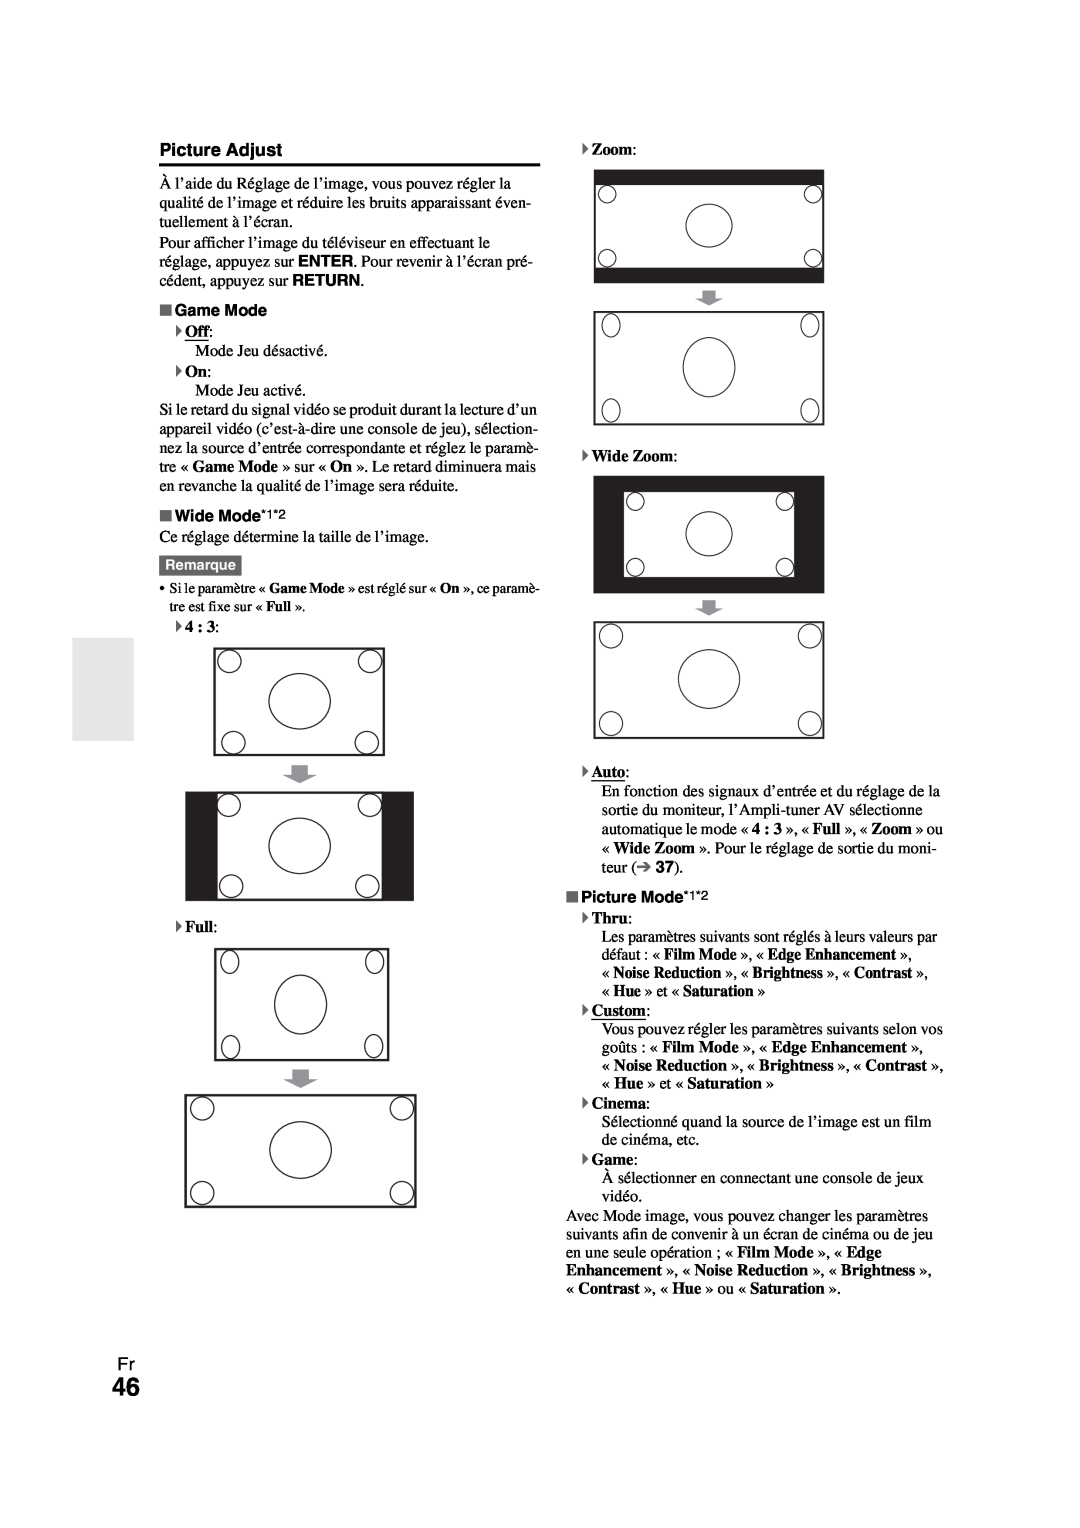 Onkyo HT-R980 instruction manual Picture Adjust, Game Mode, Wide Mode*1*2, Picture Mode*1*2 